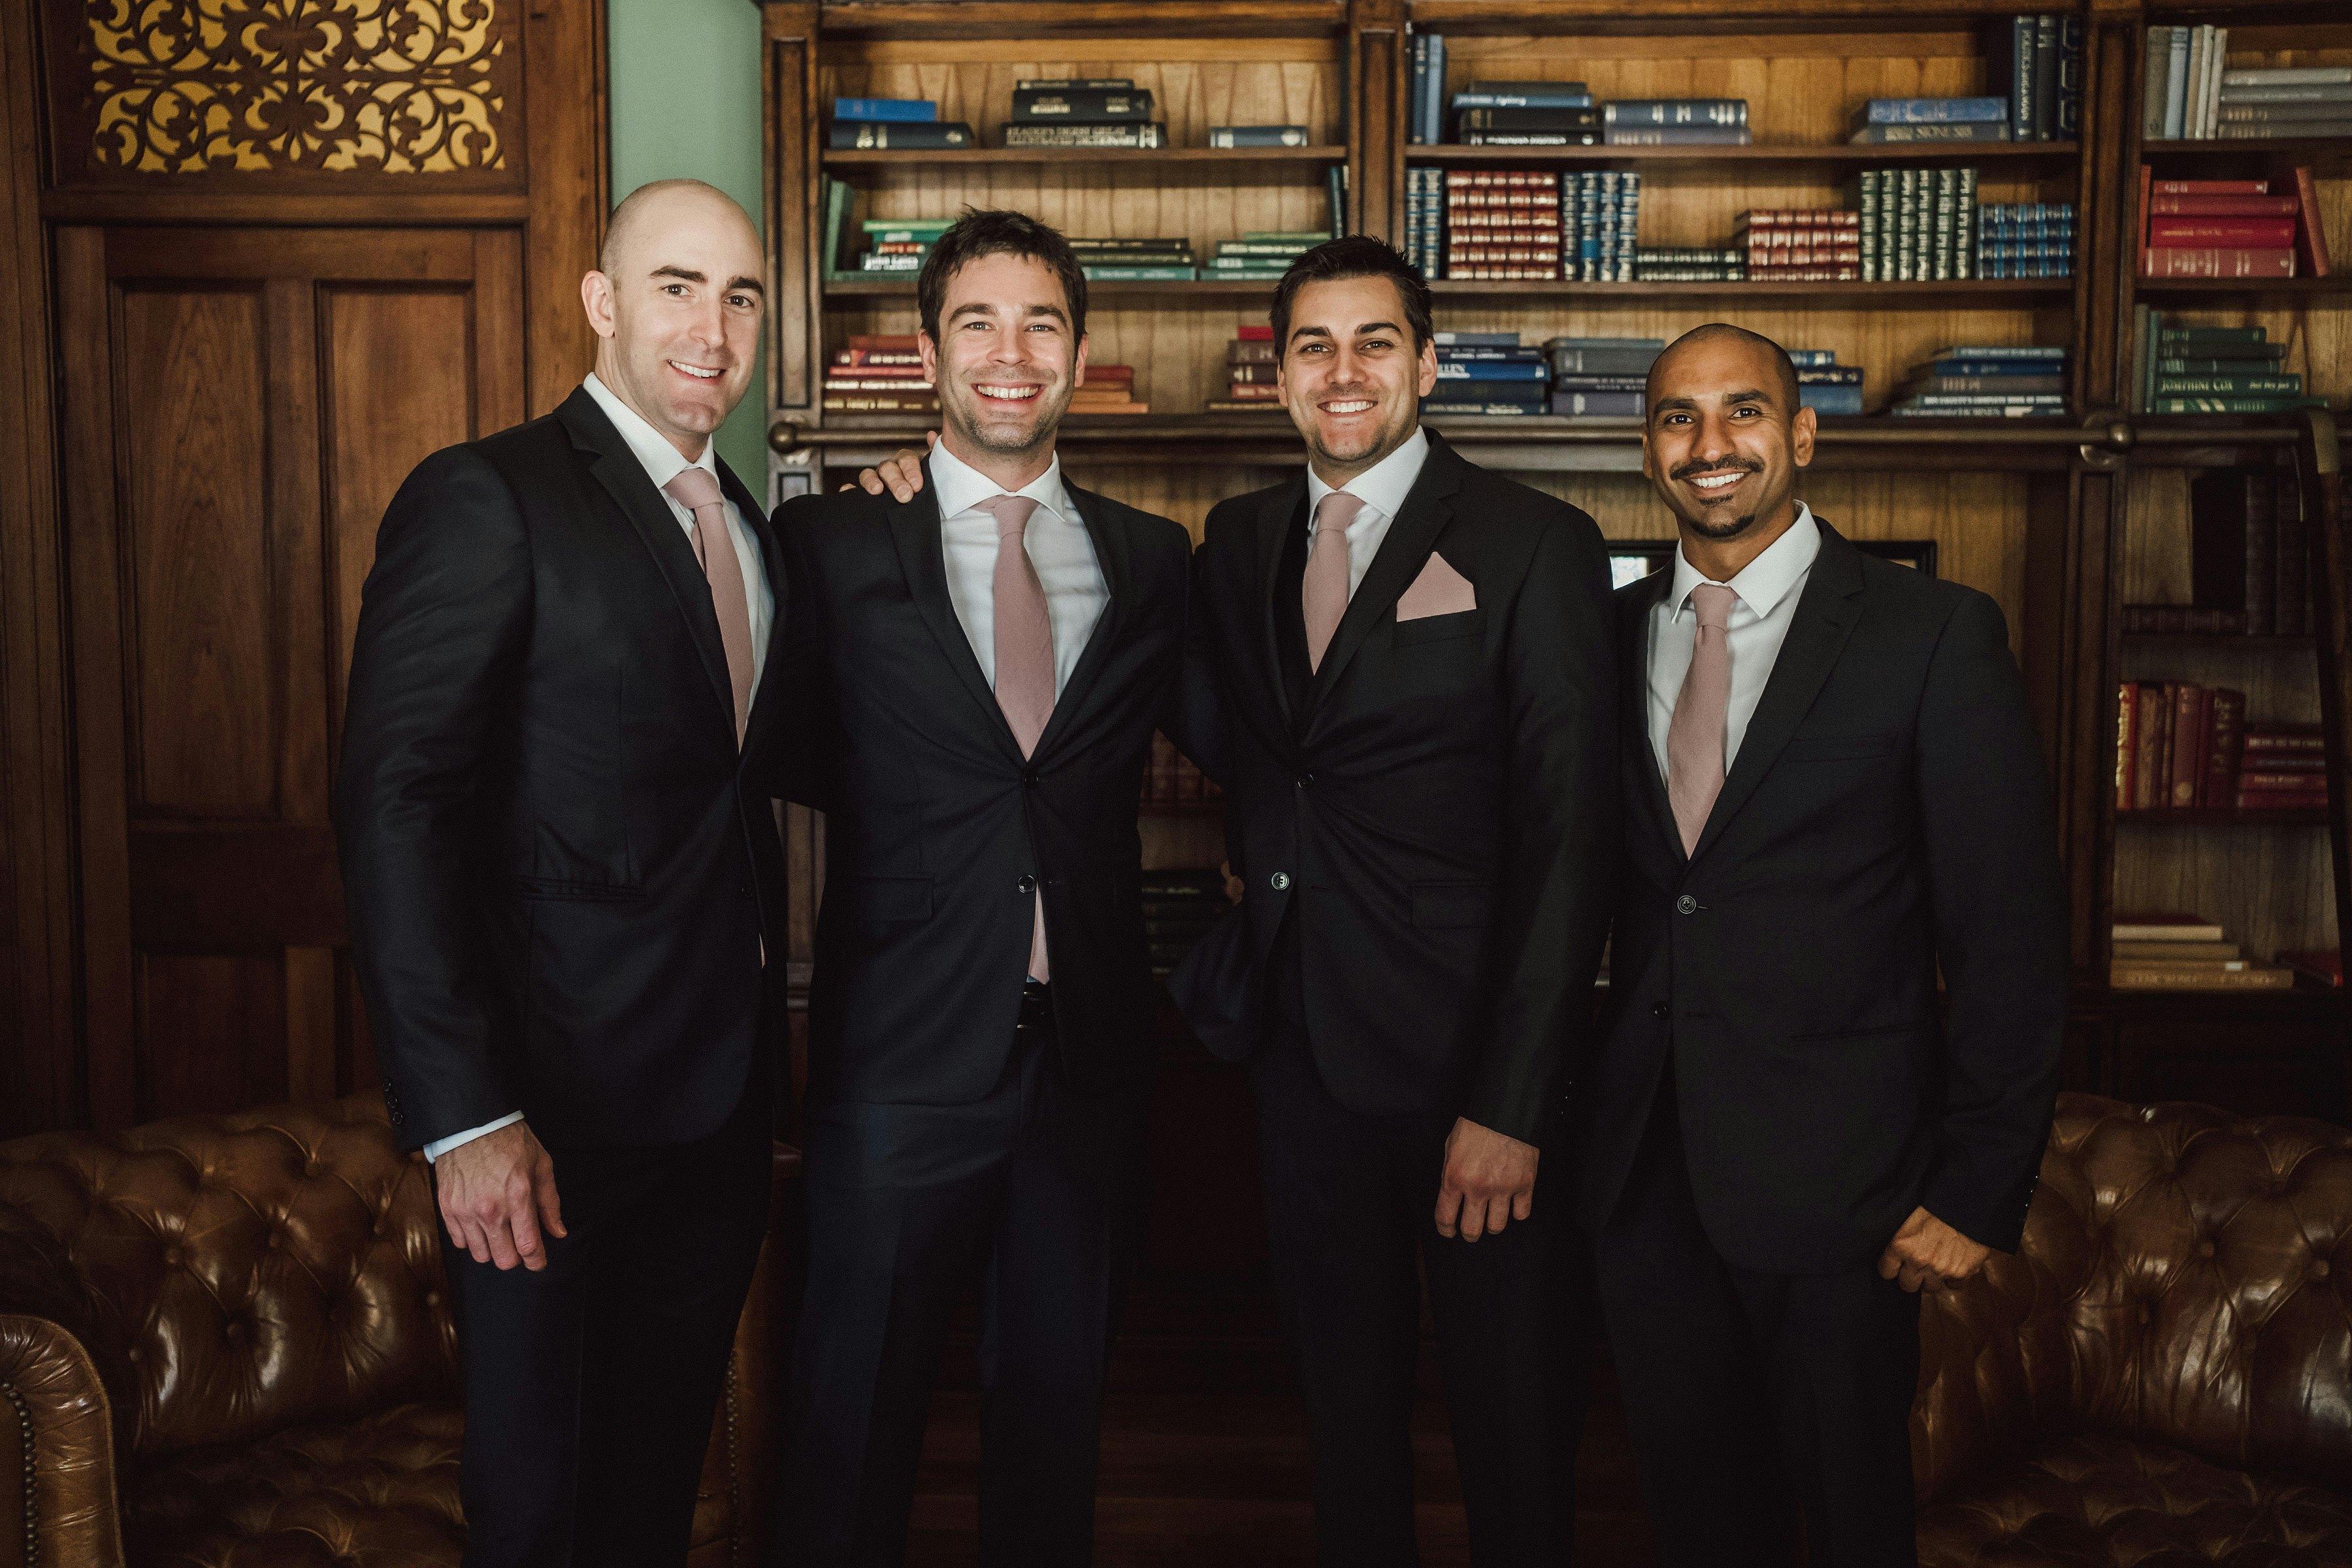 Groom and groomsmen standing in library together 